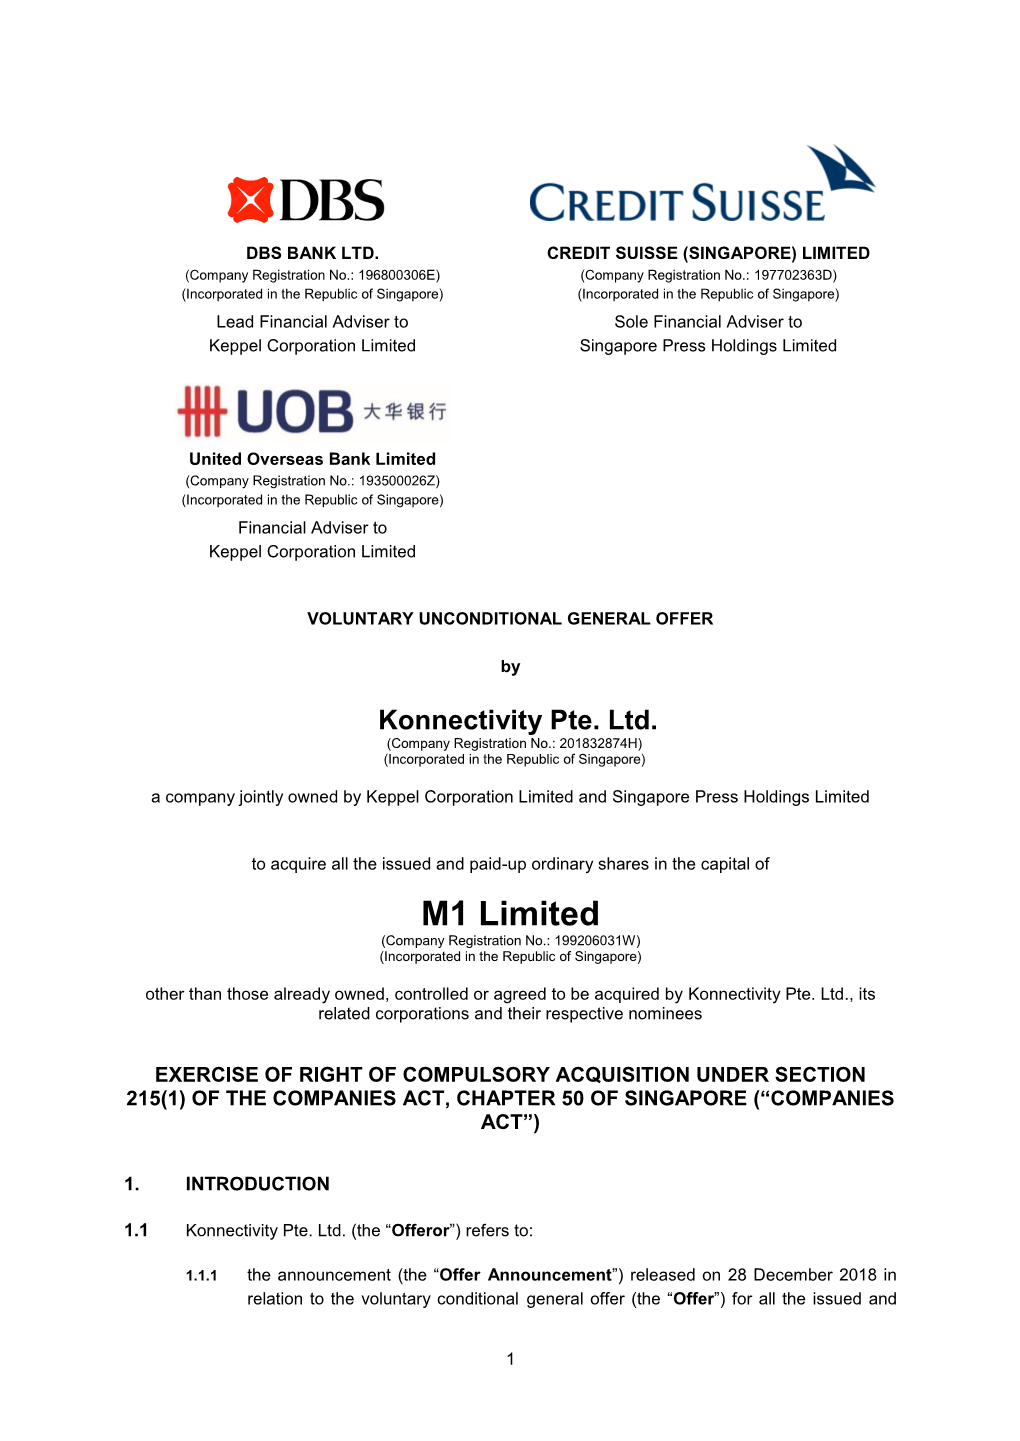 M1 Limited (Company Registration No.: 199206031W) (Incorporated in the Republic of Singapore)